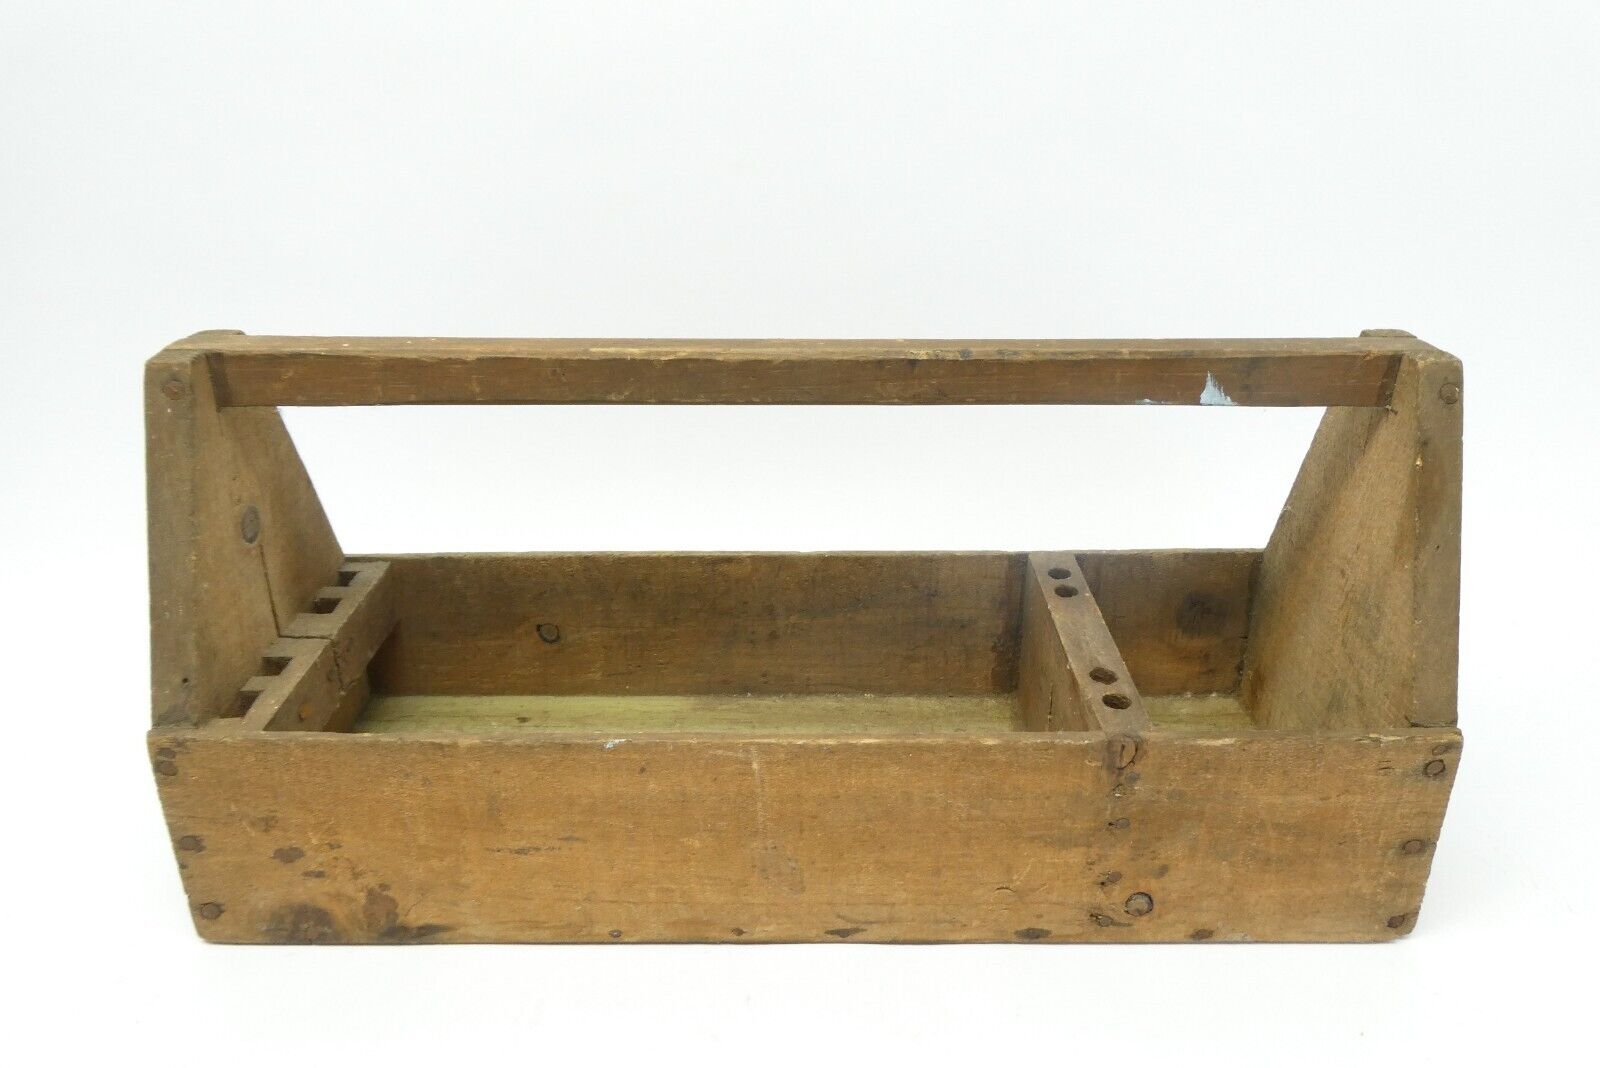 Vintage Used Rustic Wood Wooden Homemade Carpenters Tool Caddy Carrier Handled